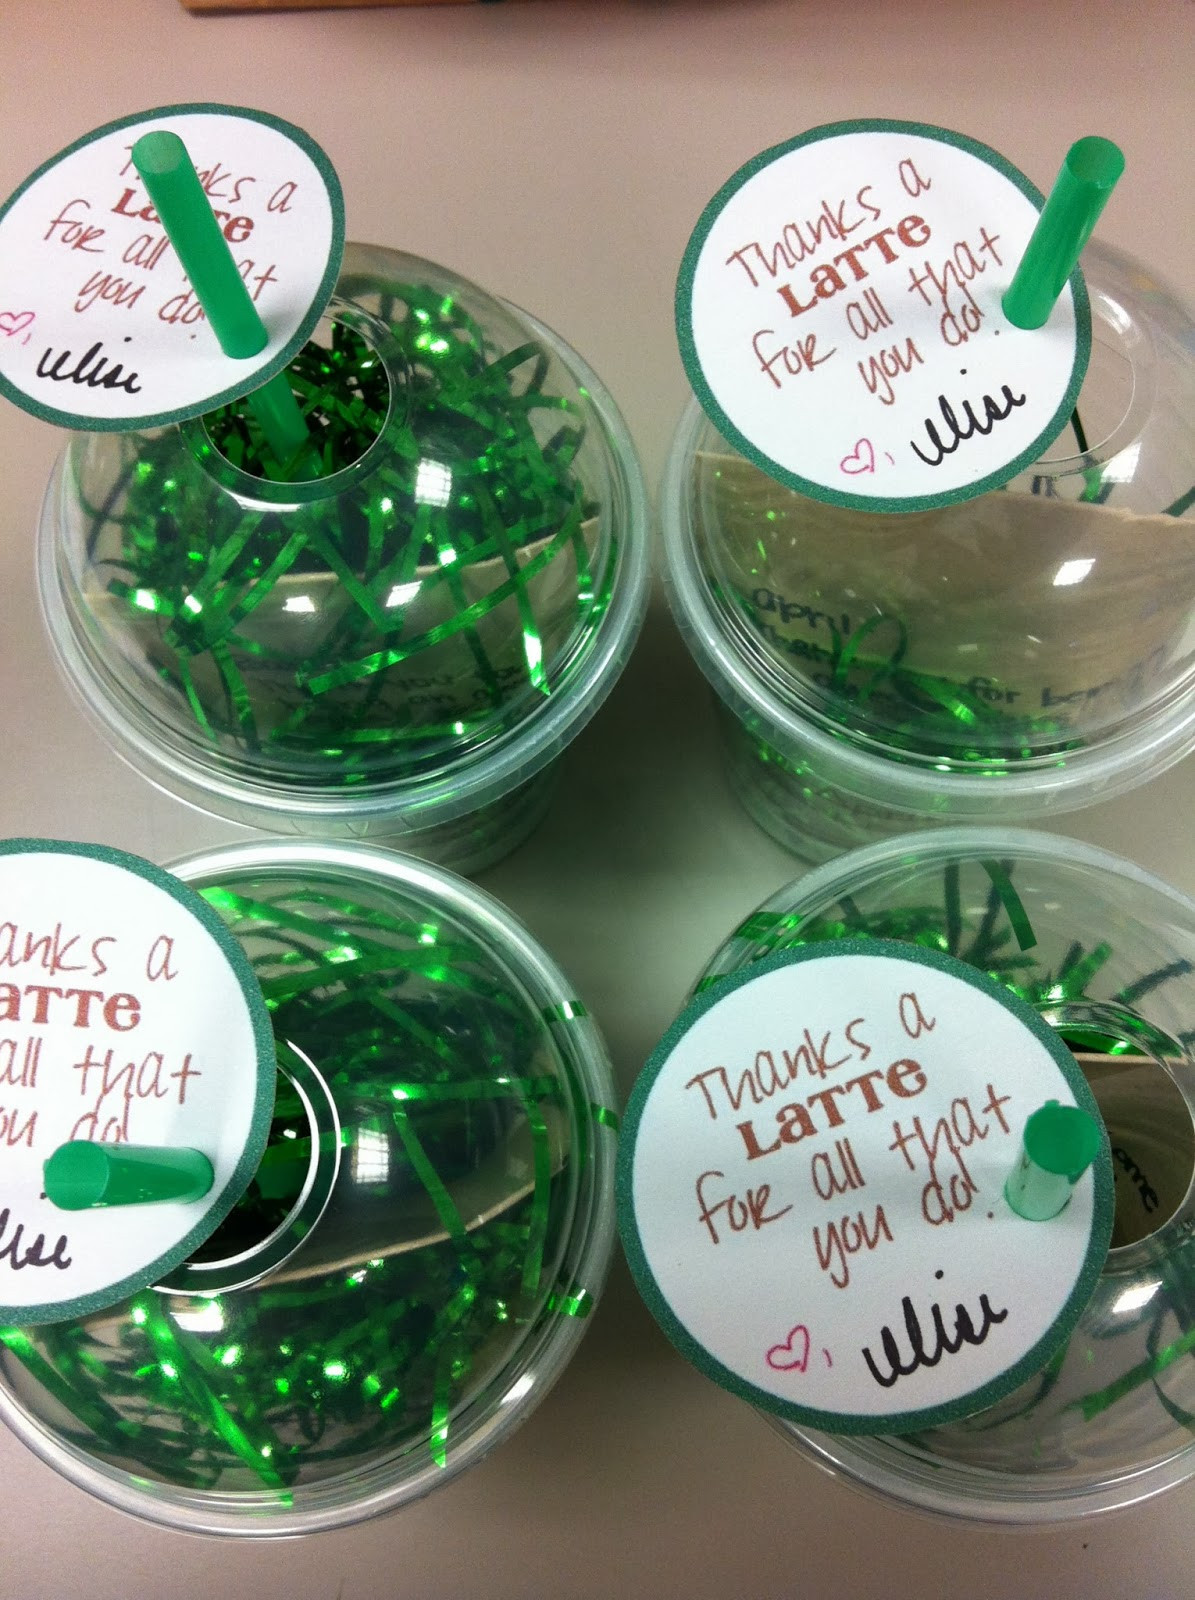 Thank You Gift Ideas For Your Boss
 Thanks A Latte Bosses Day 2013 Craft